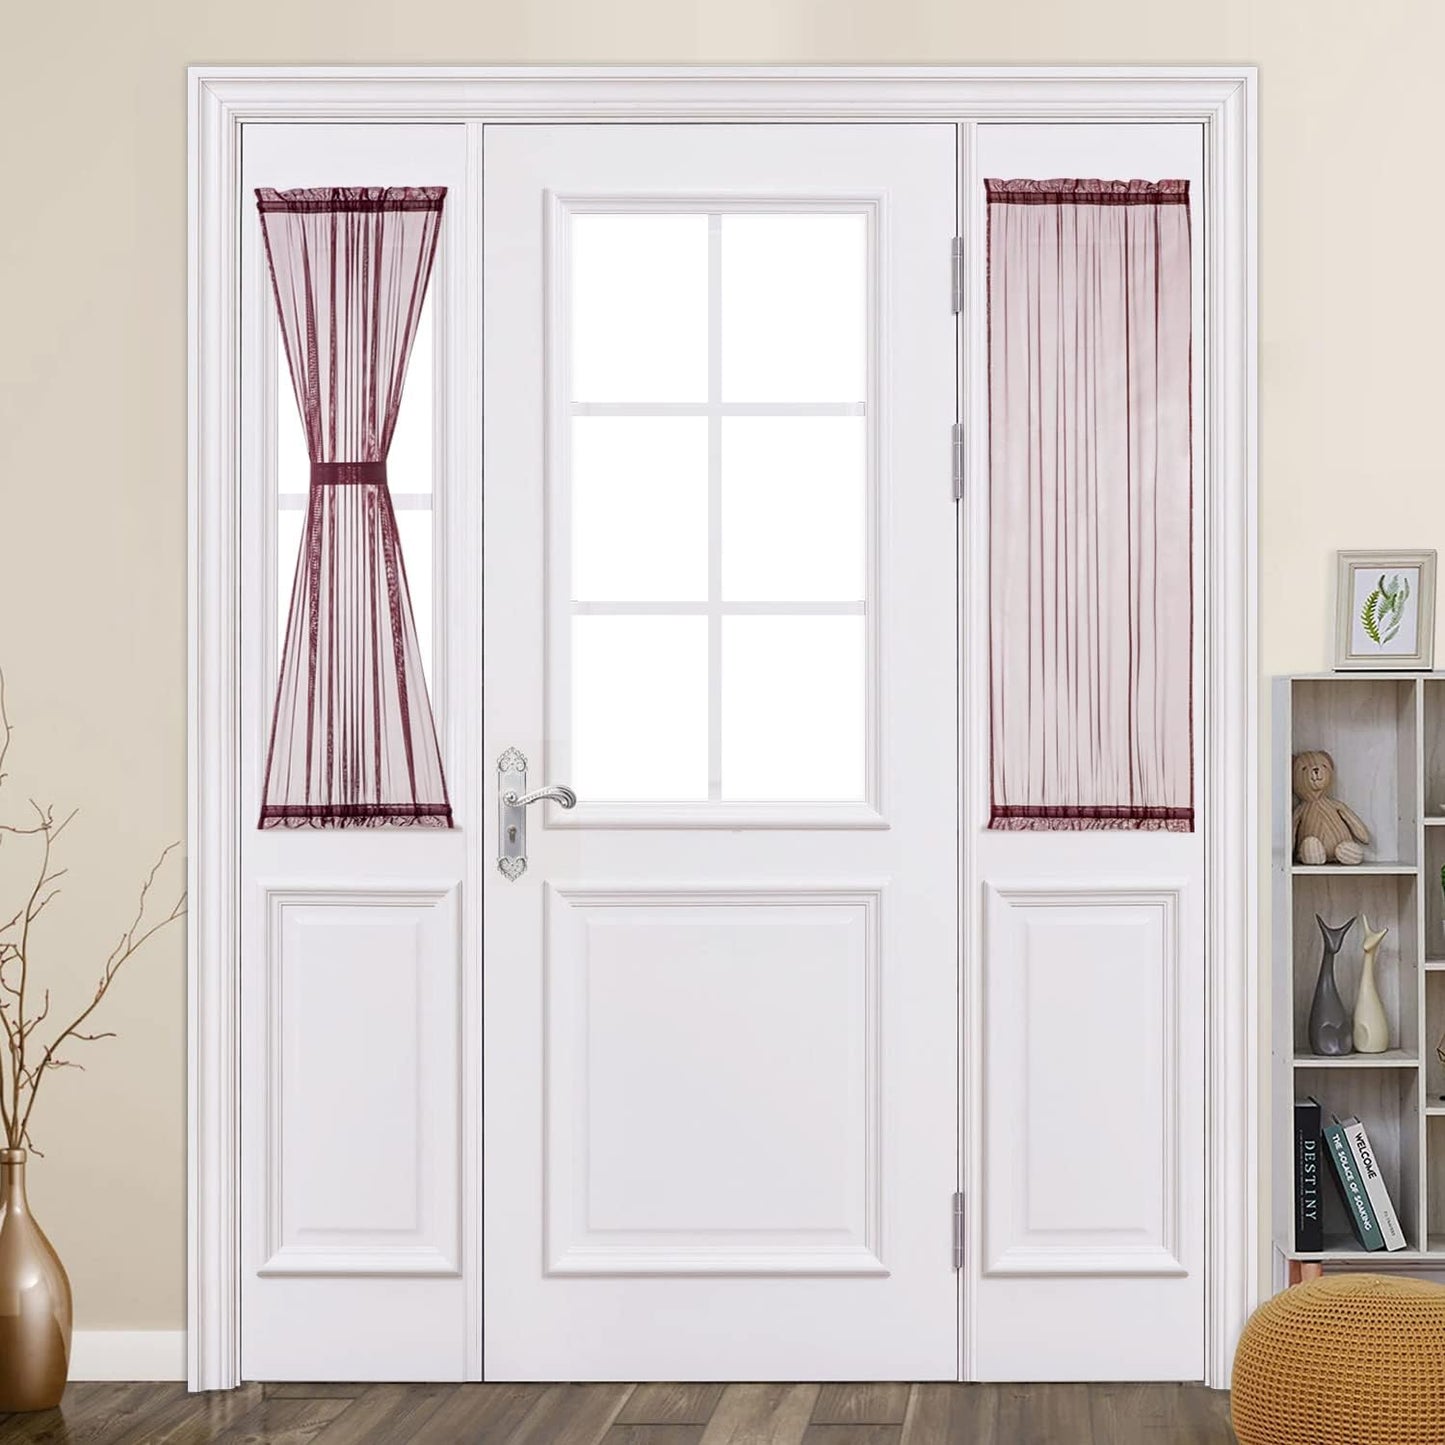 MIULEE French Door Sheer Curtains for Front Back Patio Glass Door Light Filtering Window Treatment with 2 Tiebacks 54 Wide and 72 Inches Length, White, Set of 2  MIULEE Maroon Red 25"W X 40"L 